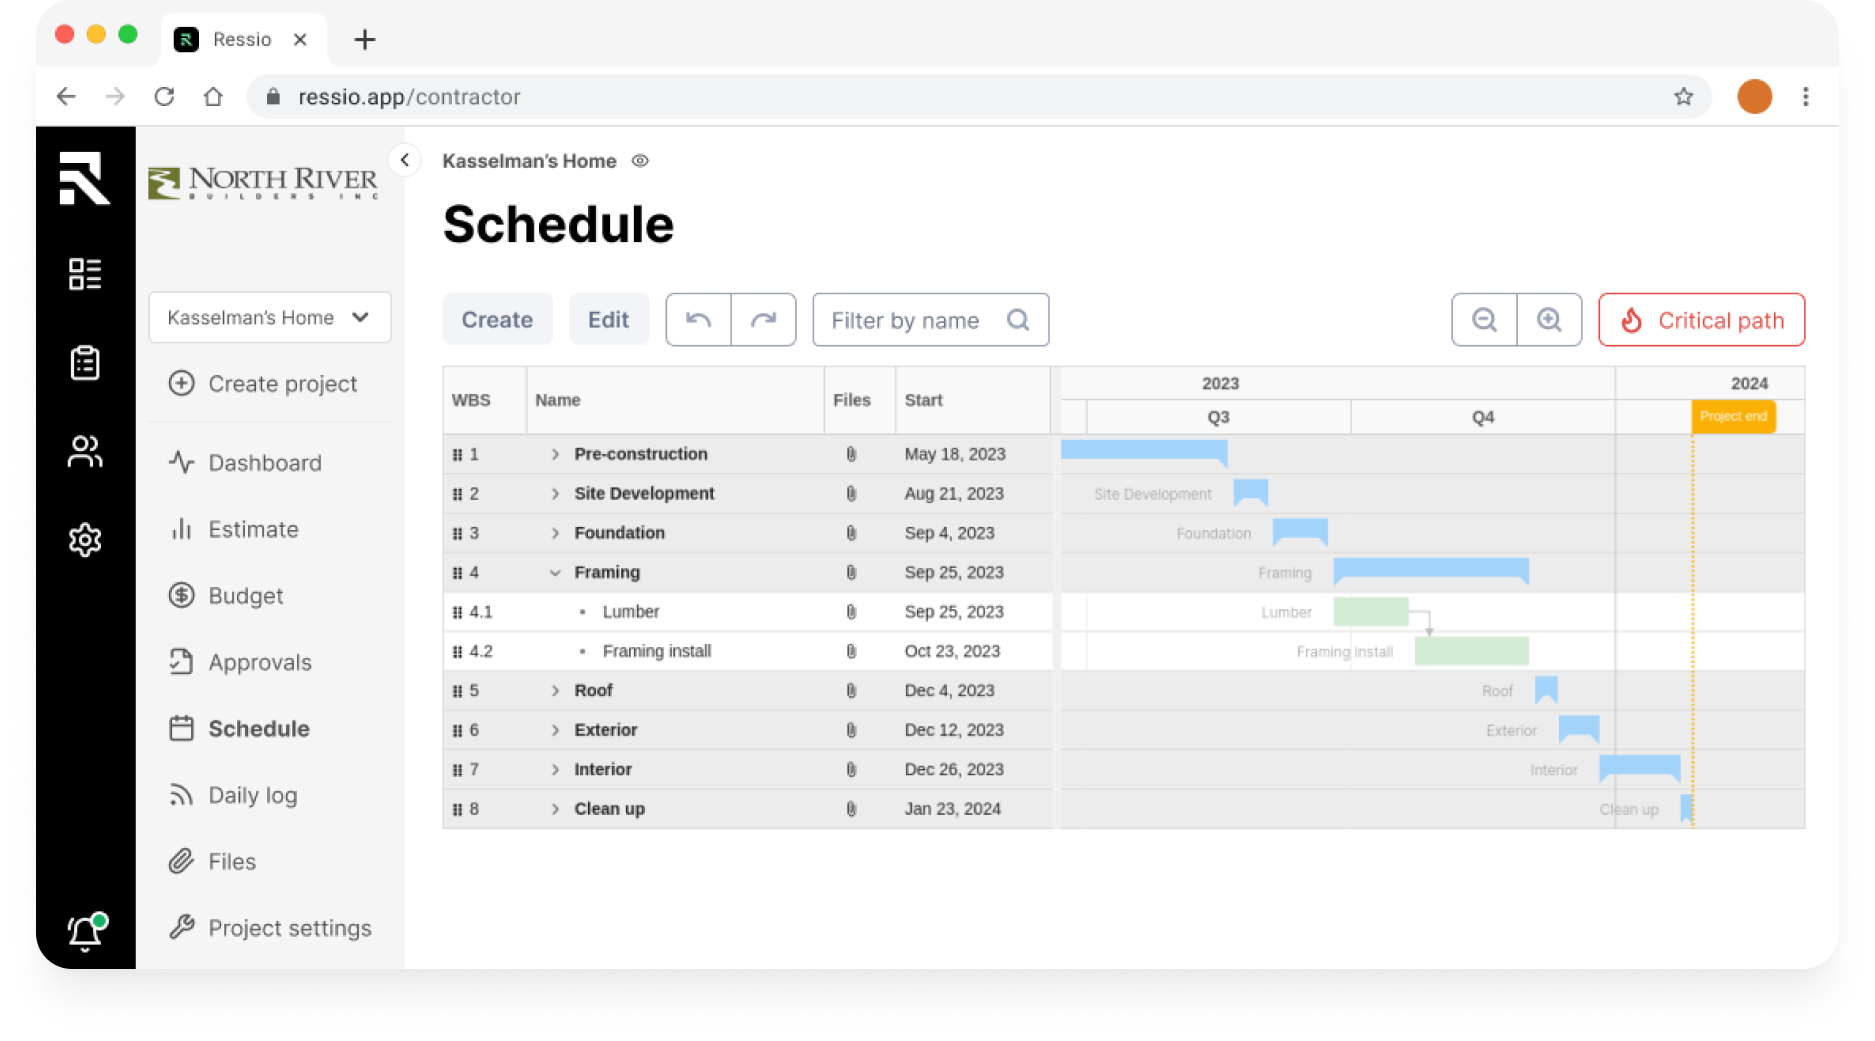 Track your schedule tasks and reduce delays